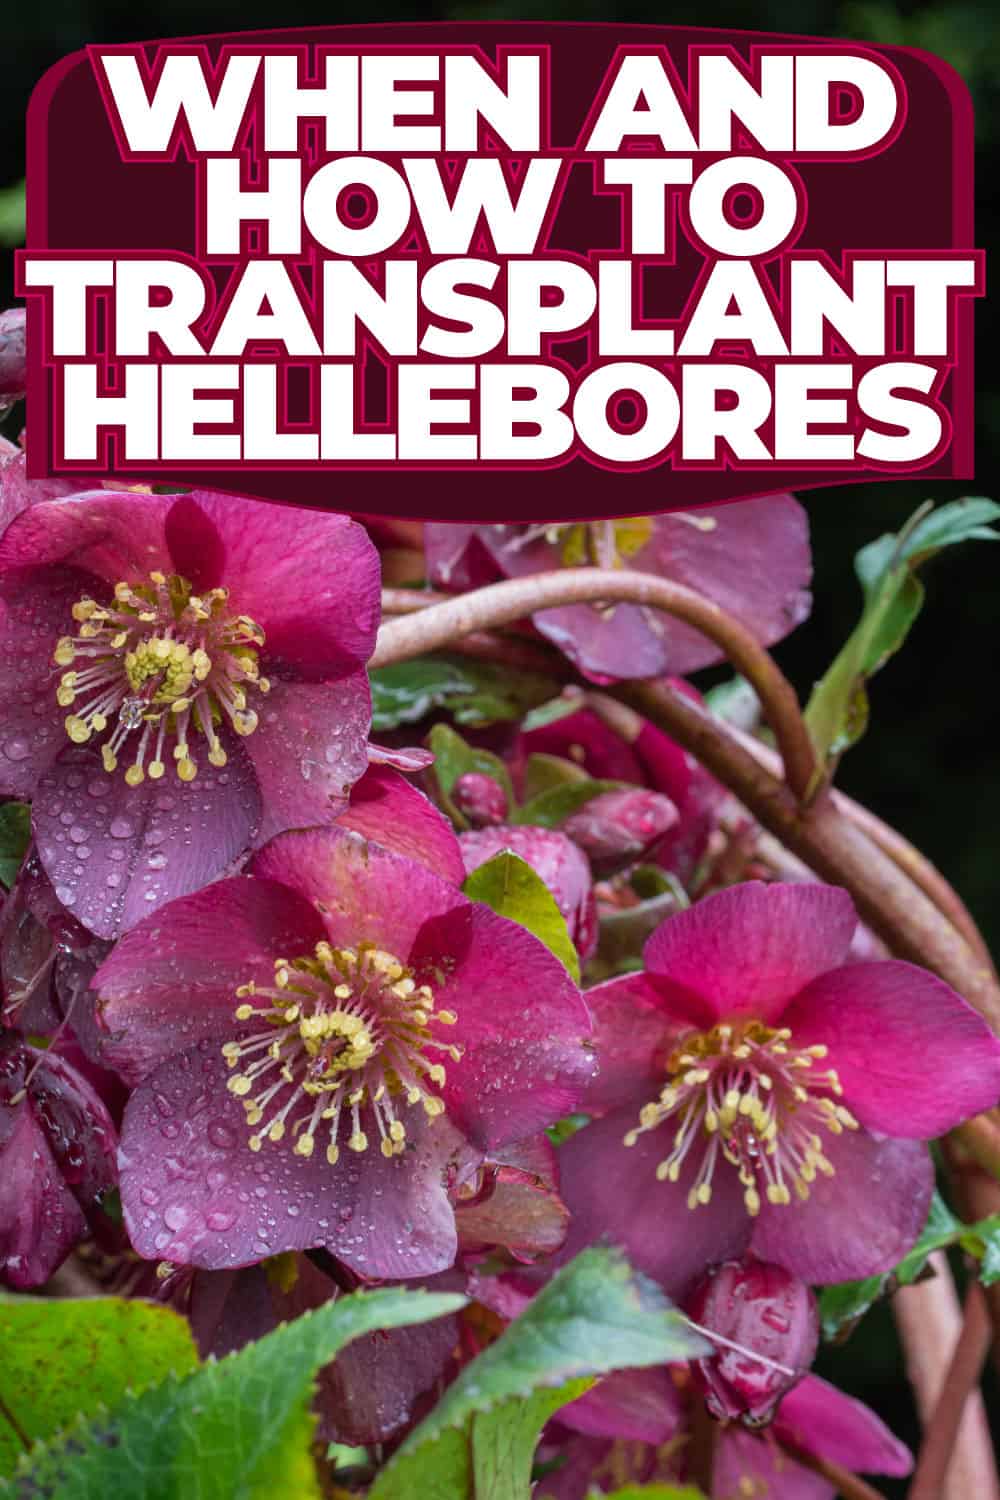 When And How To Transplant Hellebores